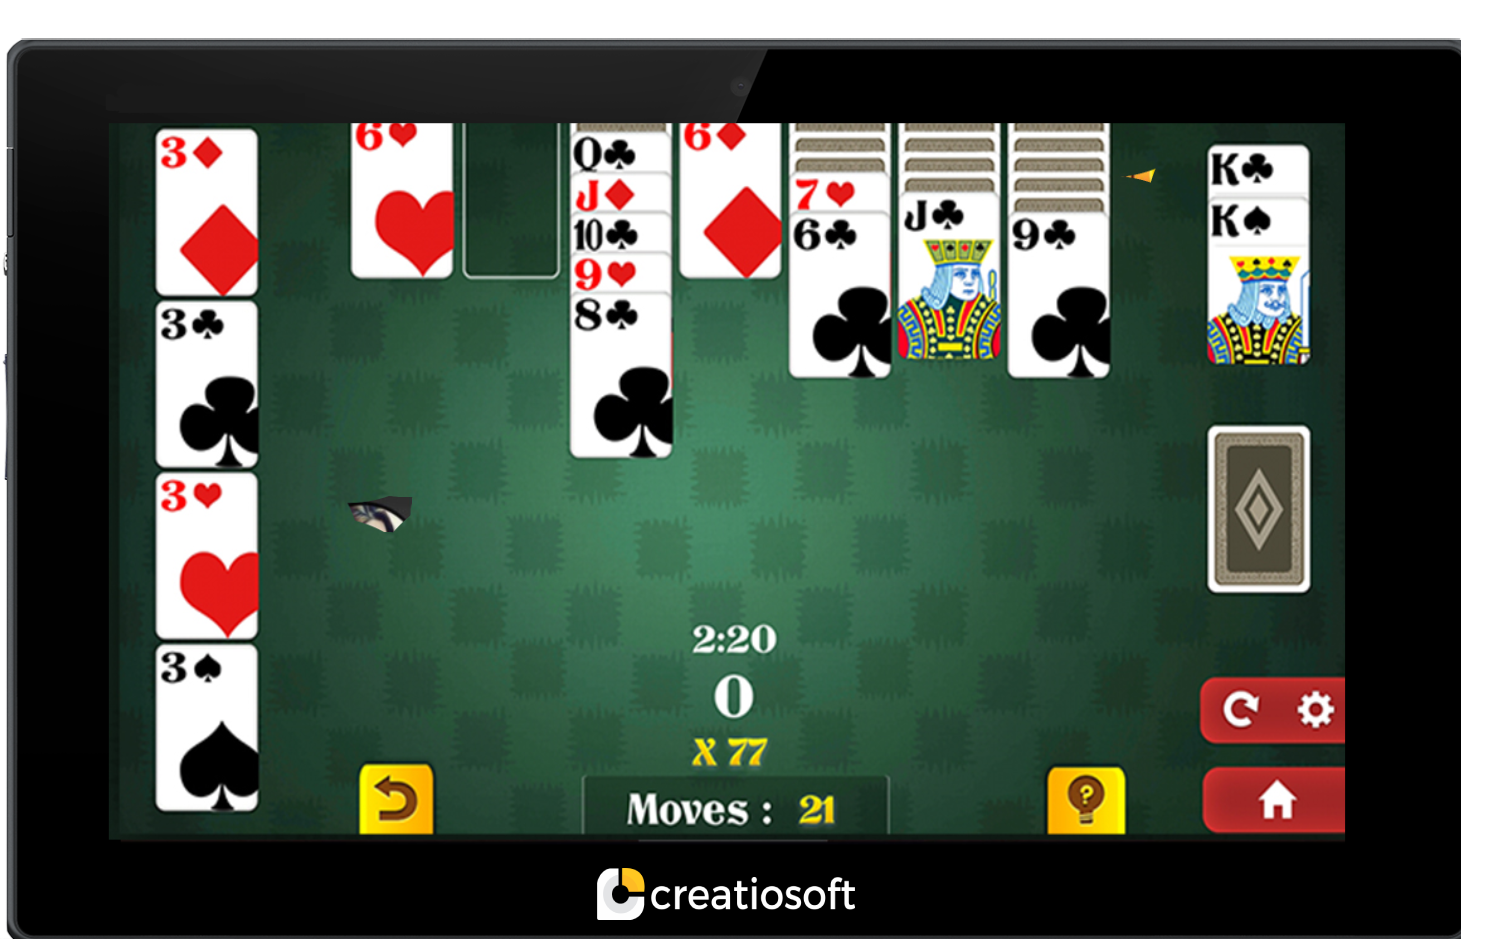 The Growing Popularity of Online Card Game Apps Market